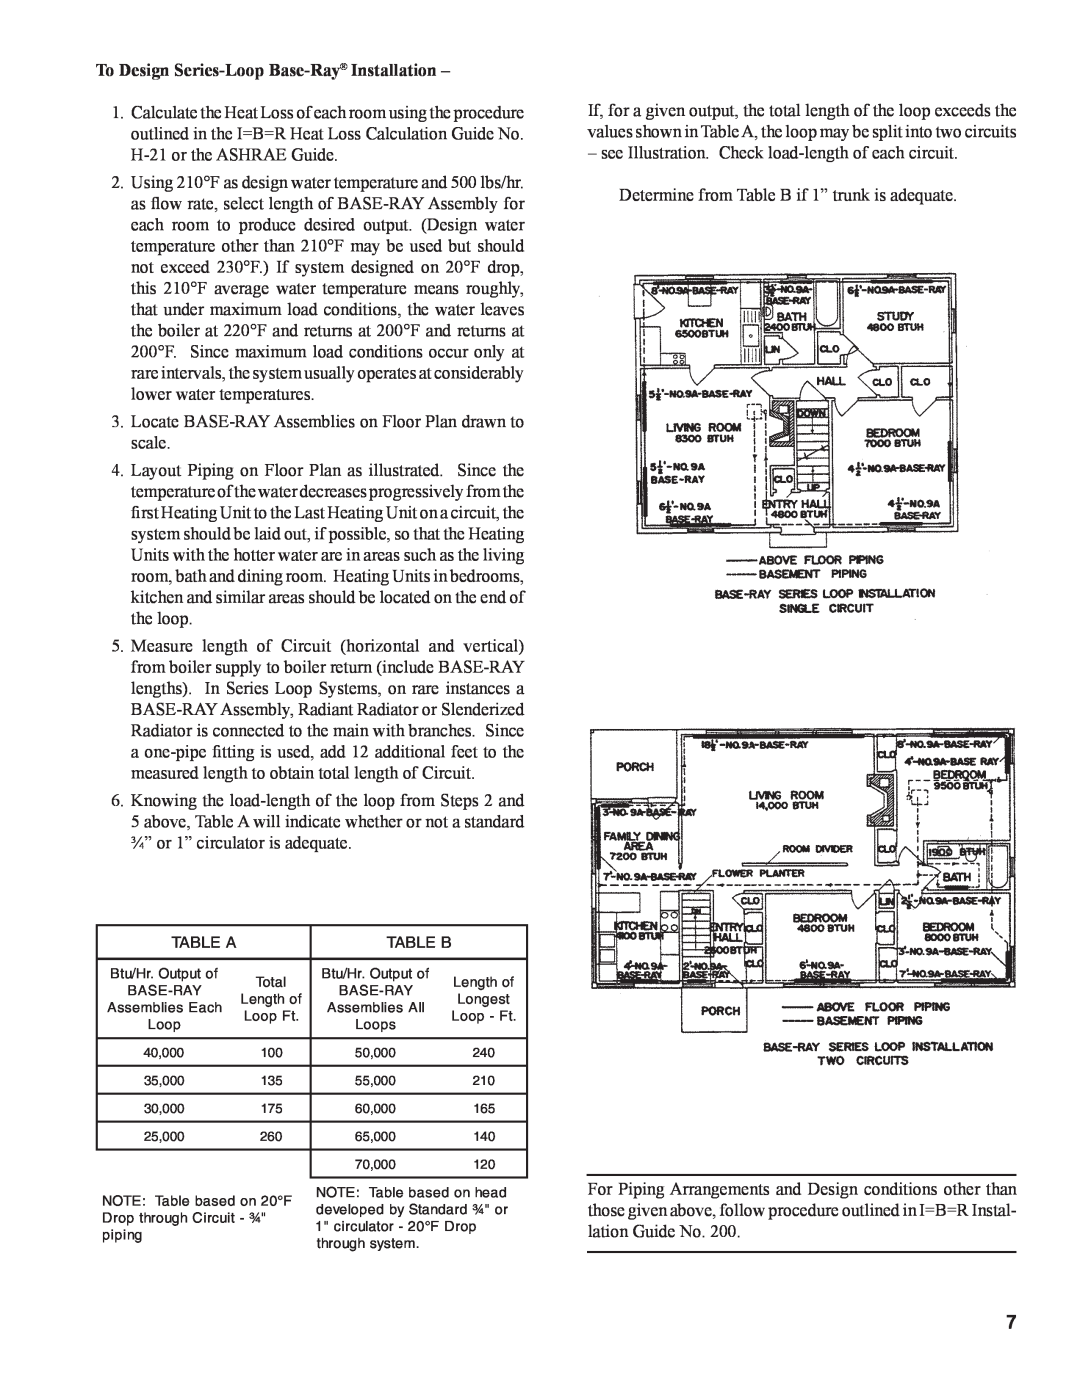 Burnham 81441001R8-3/06 installation instructions To Design Series-Loop Base-Ray Installation, Table A, Table B 